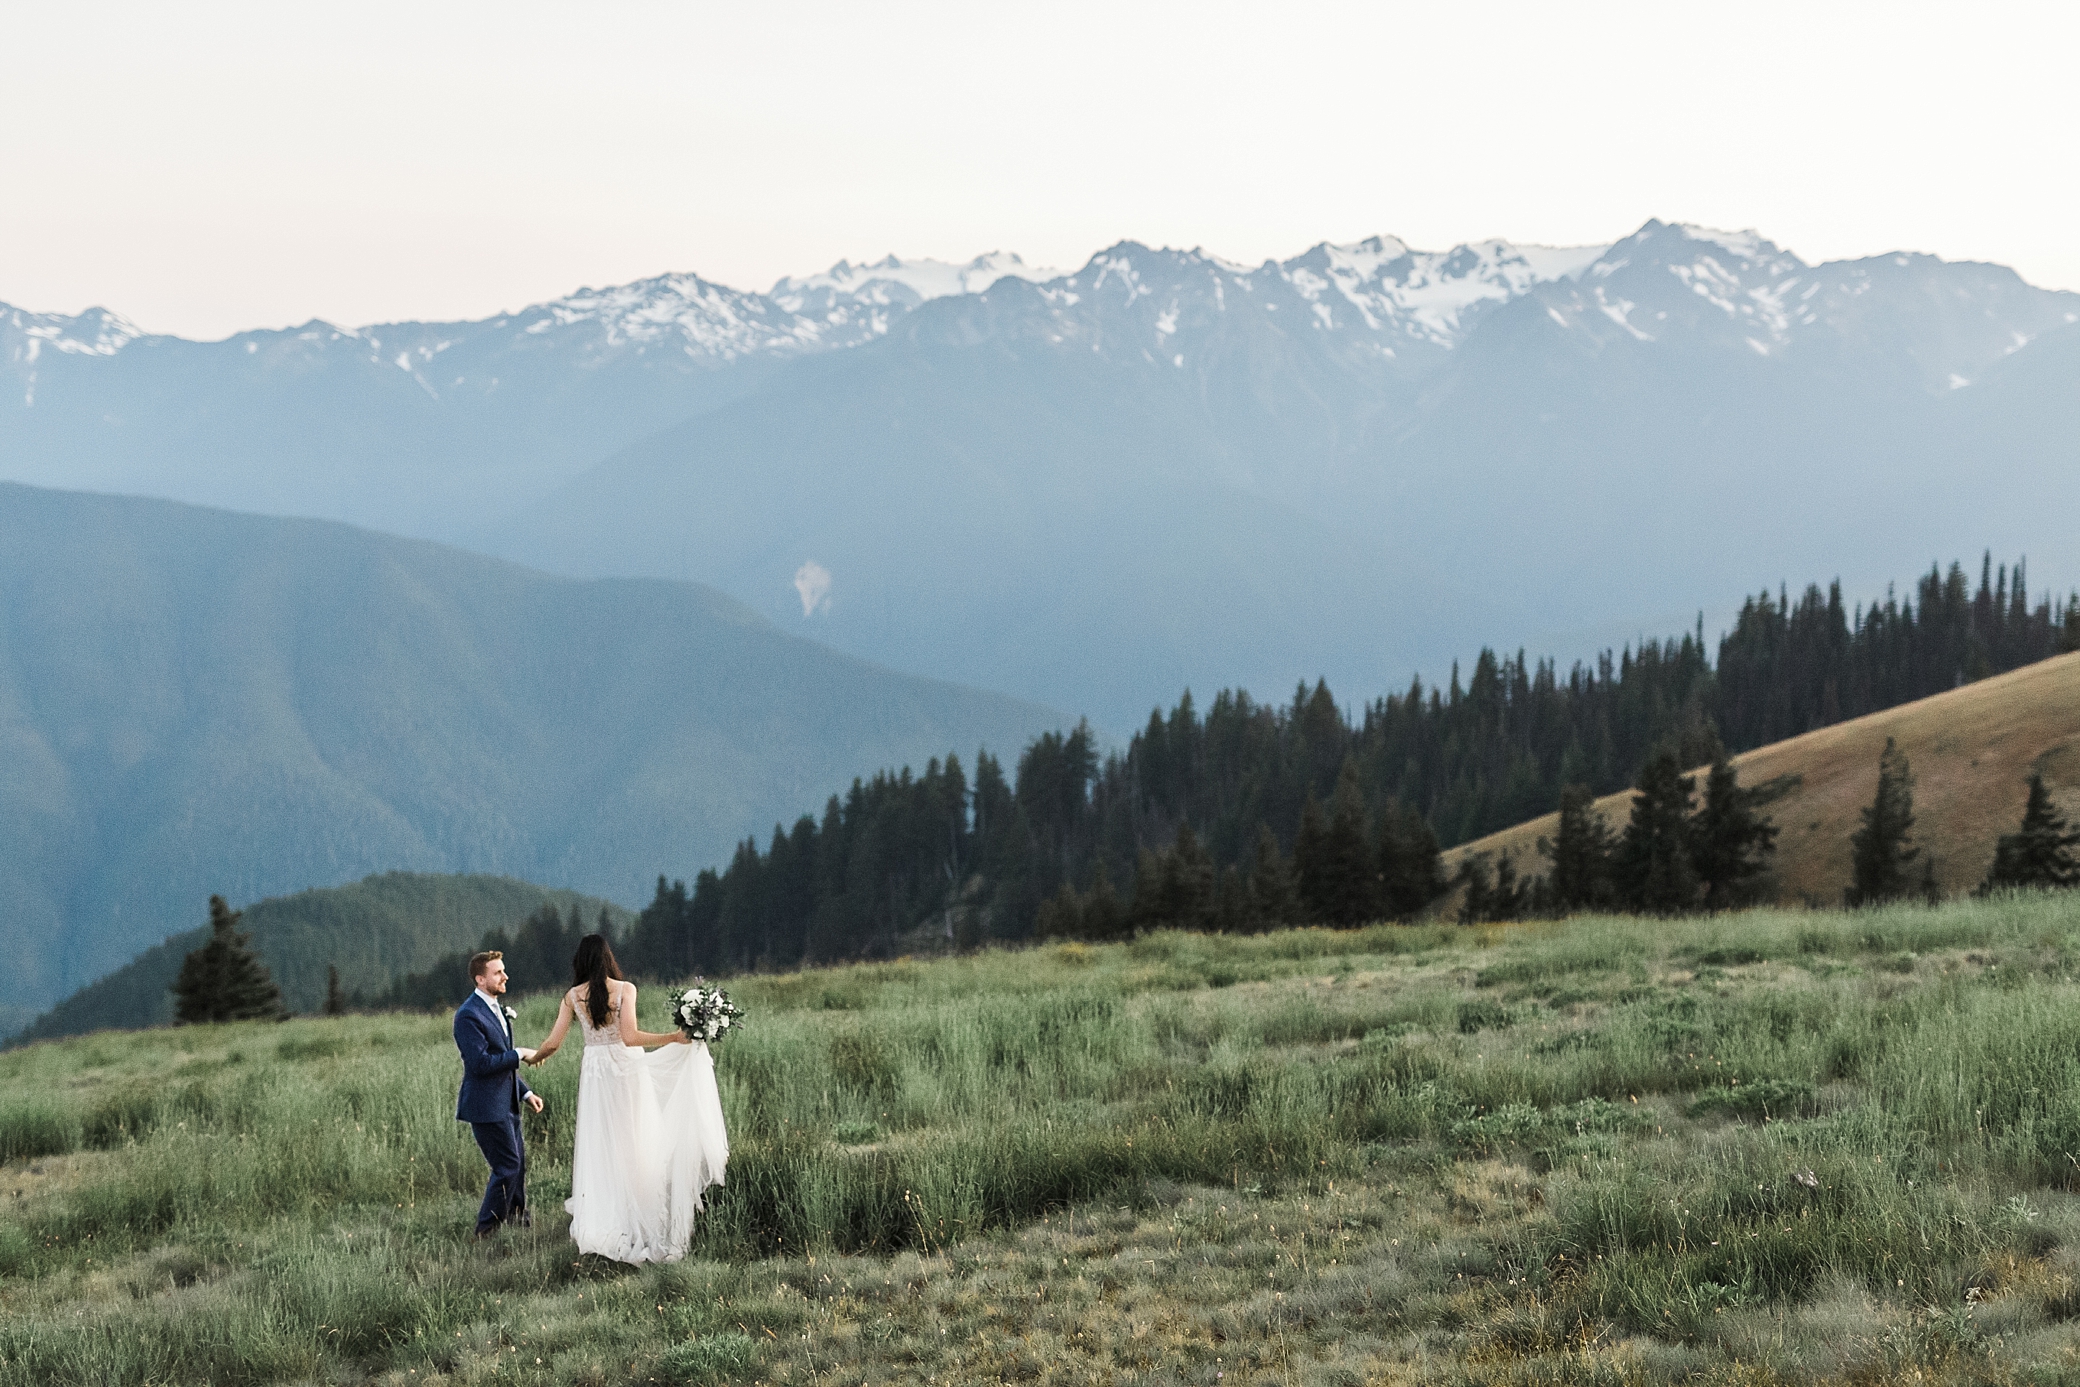 Bride and groom photos at Hurricane Ridge in the Olympic National Park. Photographed by Adventure Elopement Photographer, Megan Montalvo Photography